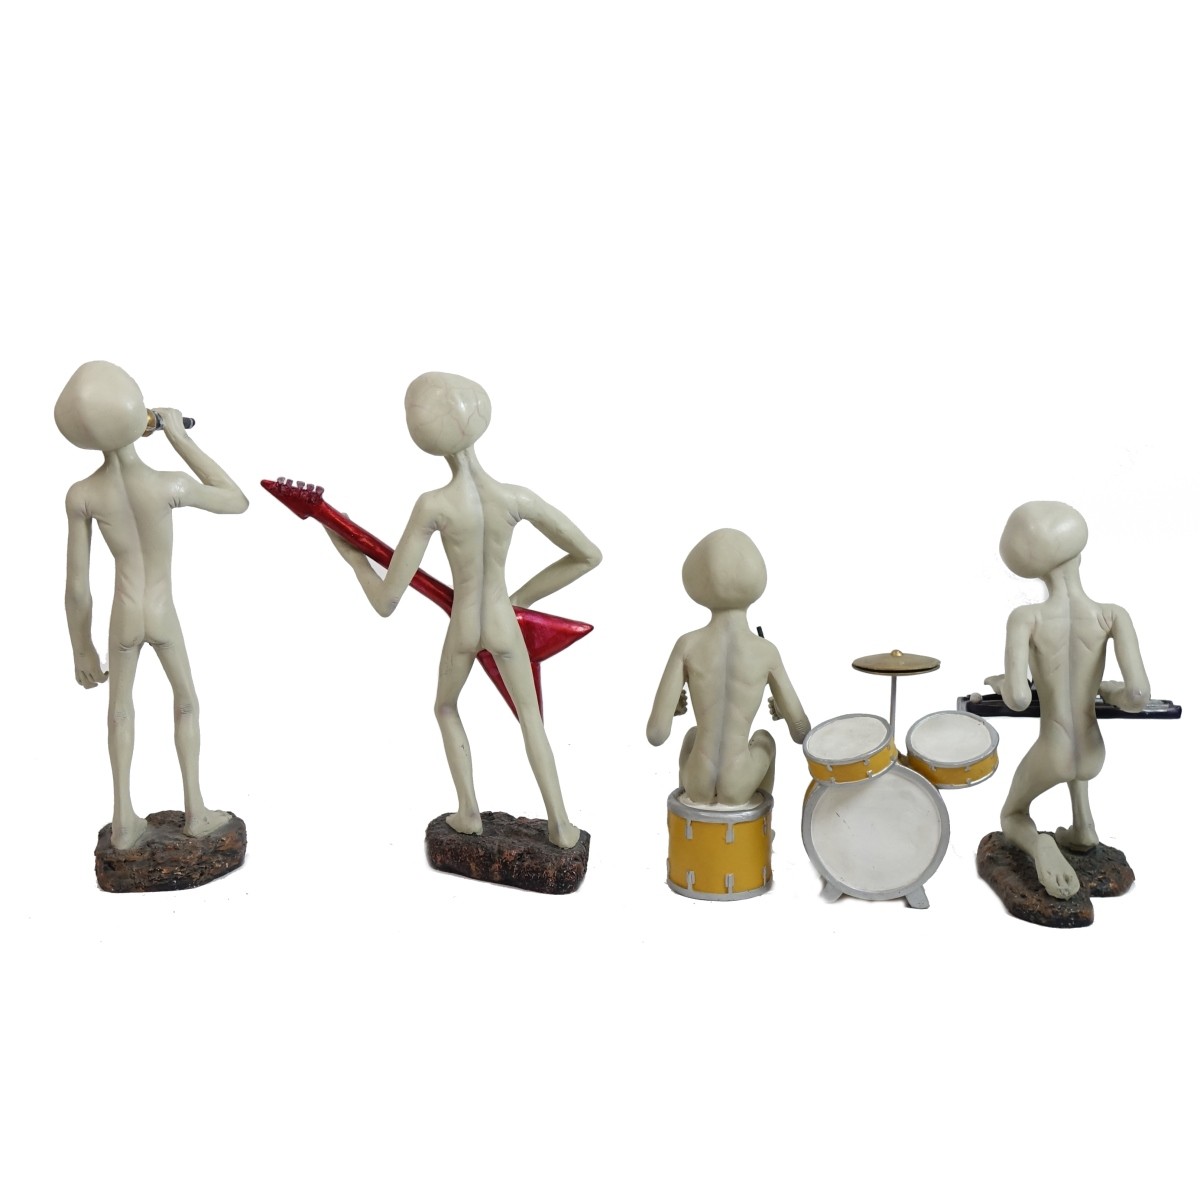 Five (5) Hand Painted Alien Rock Band Figurines